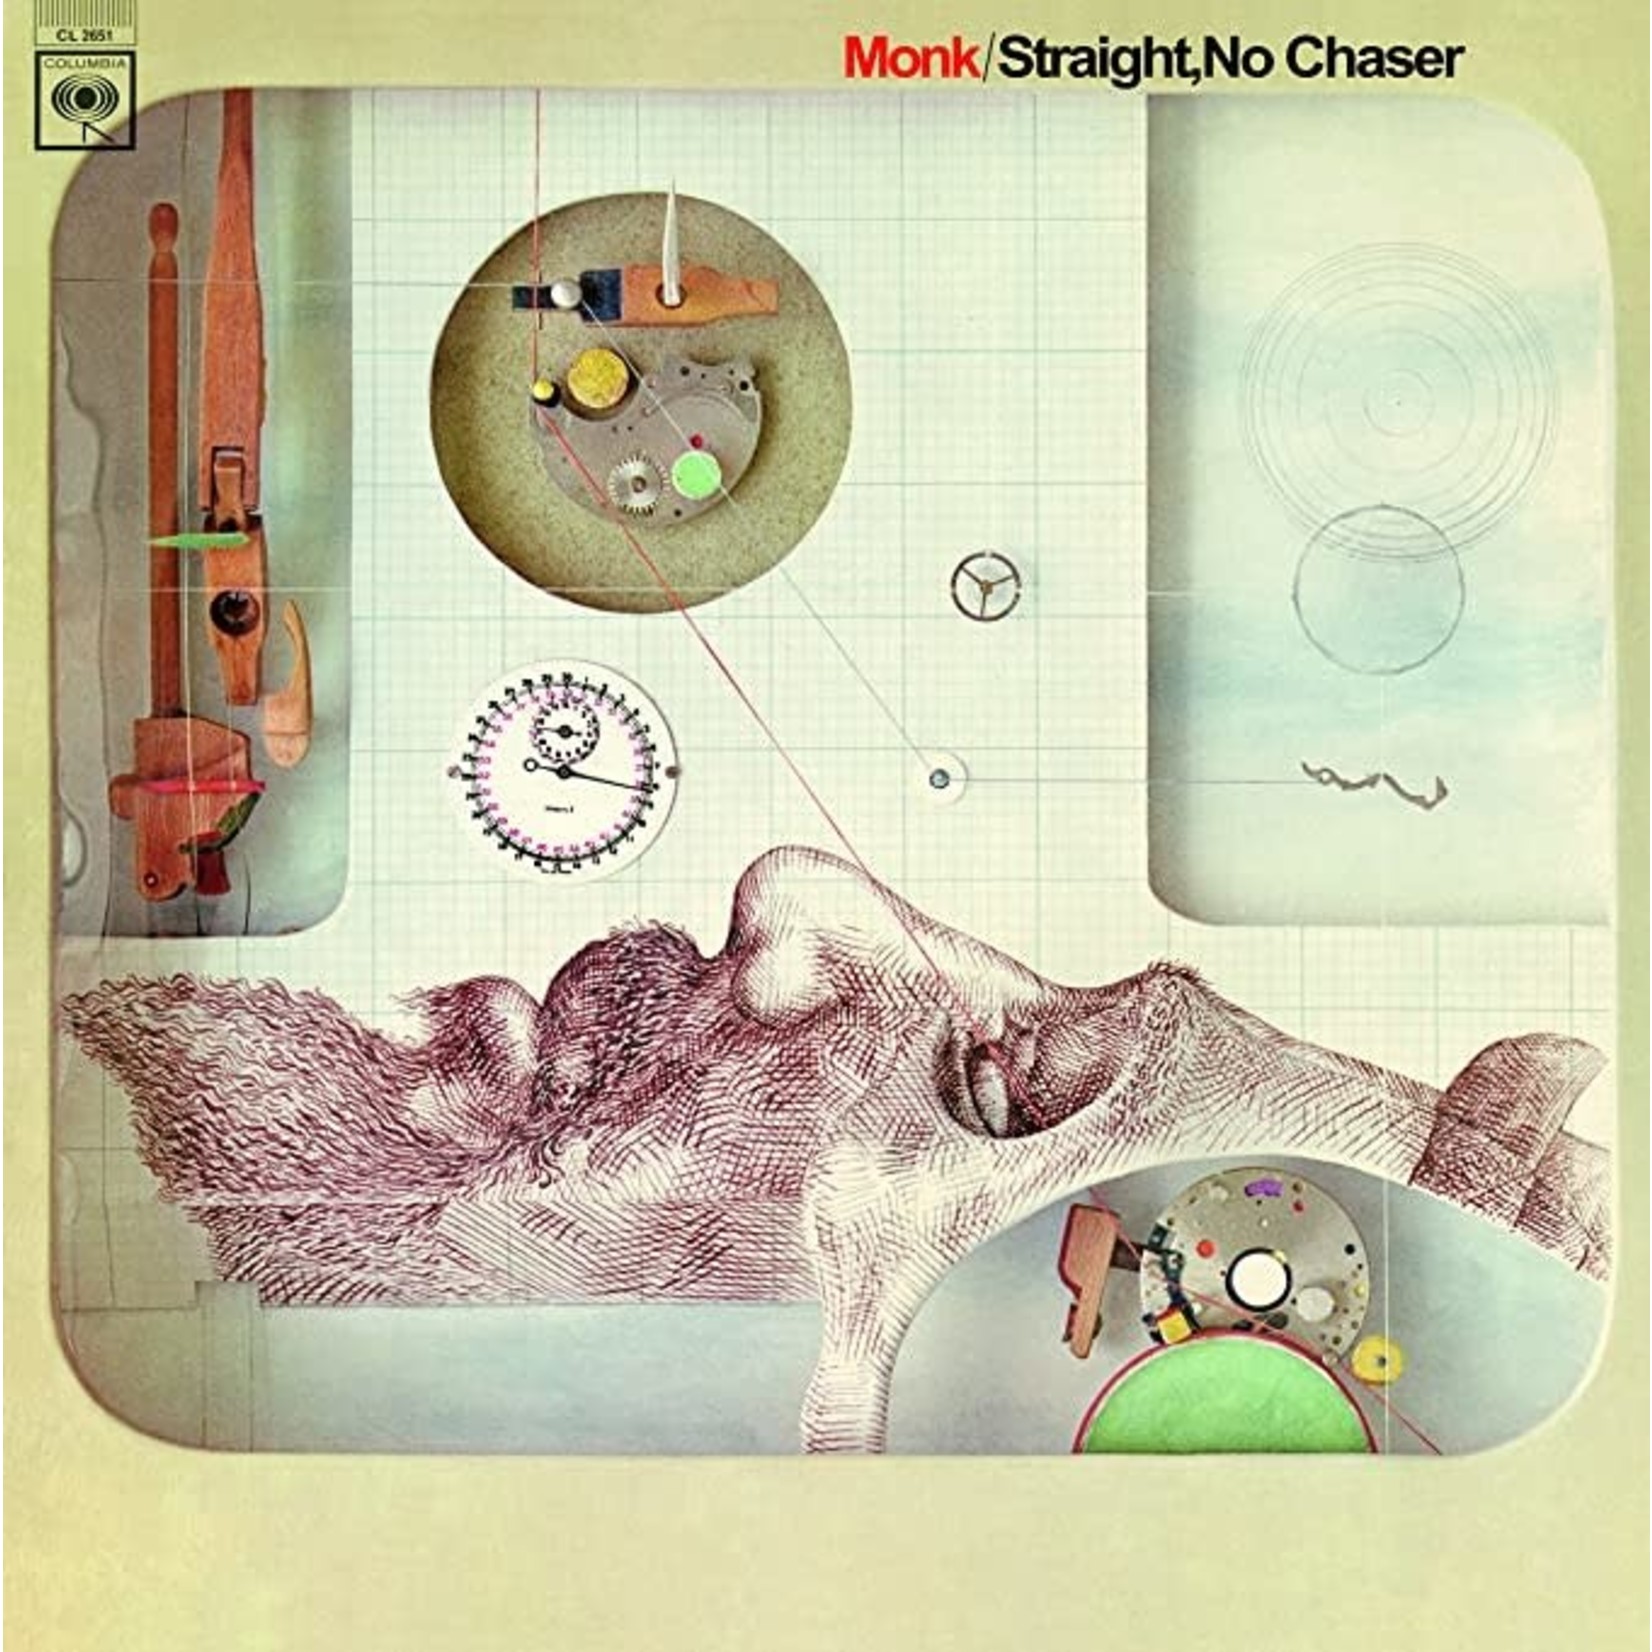 [New] Thelonious Monk - Straight No Chaser